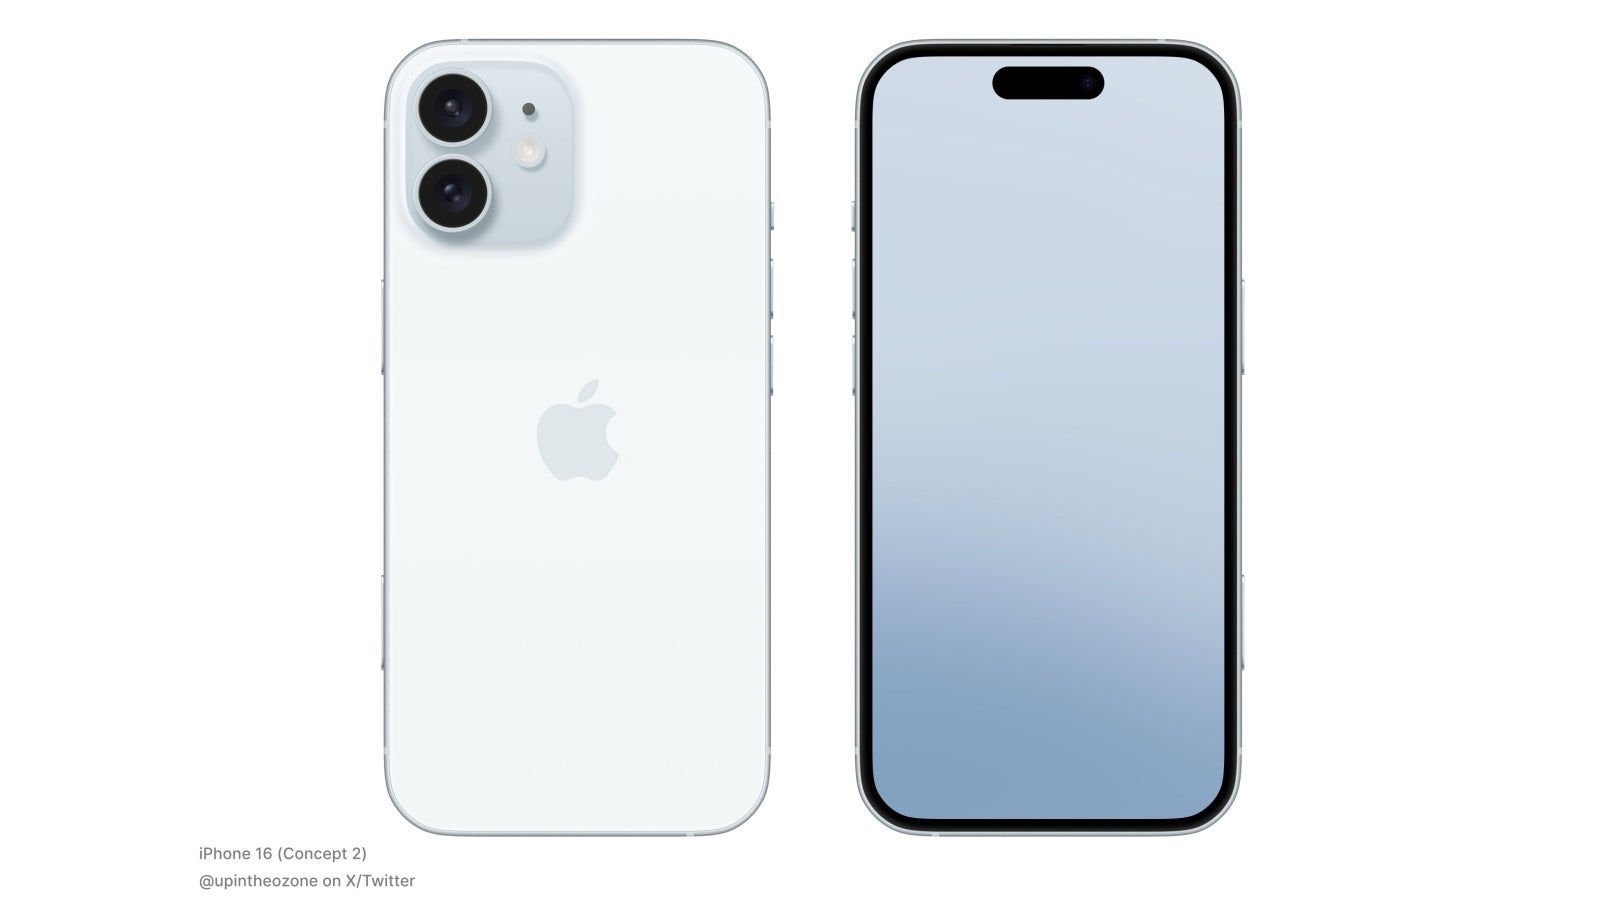 The alleged iPhone 16. - Stop looking forward to the iPhone 16 - you might be disappointed: Buy Apple's best mistake instead!